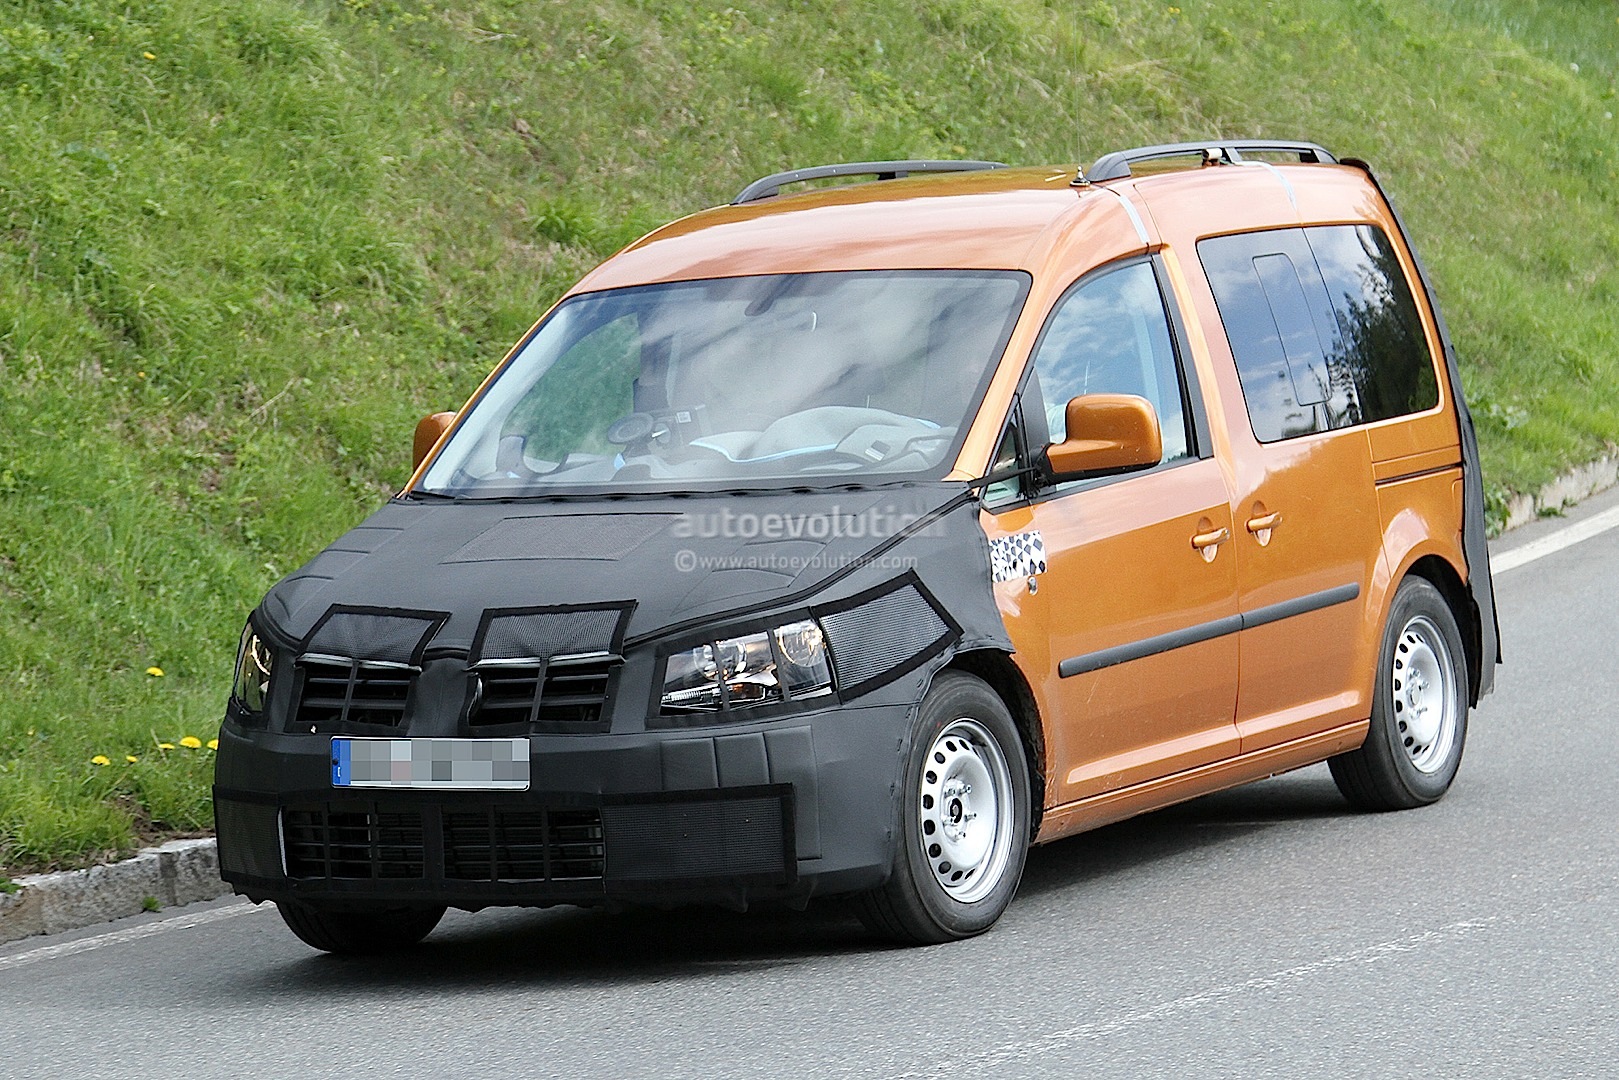 New Volkswagen Caddy Spied Testing For 2015 Launch